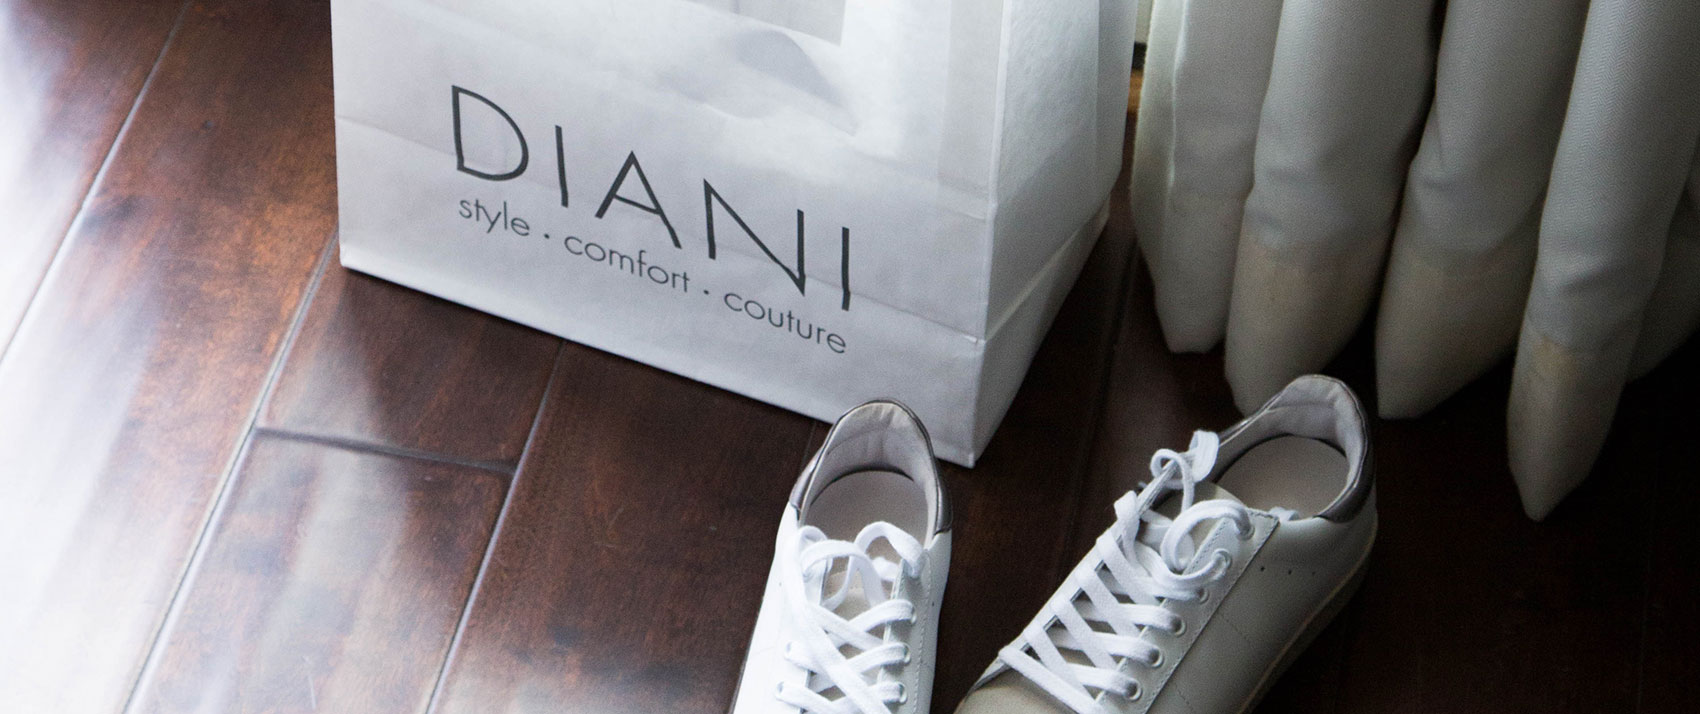 Diani Bag and Shoes